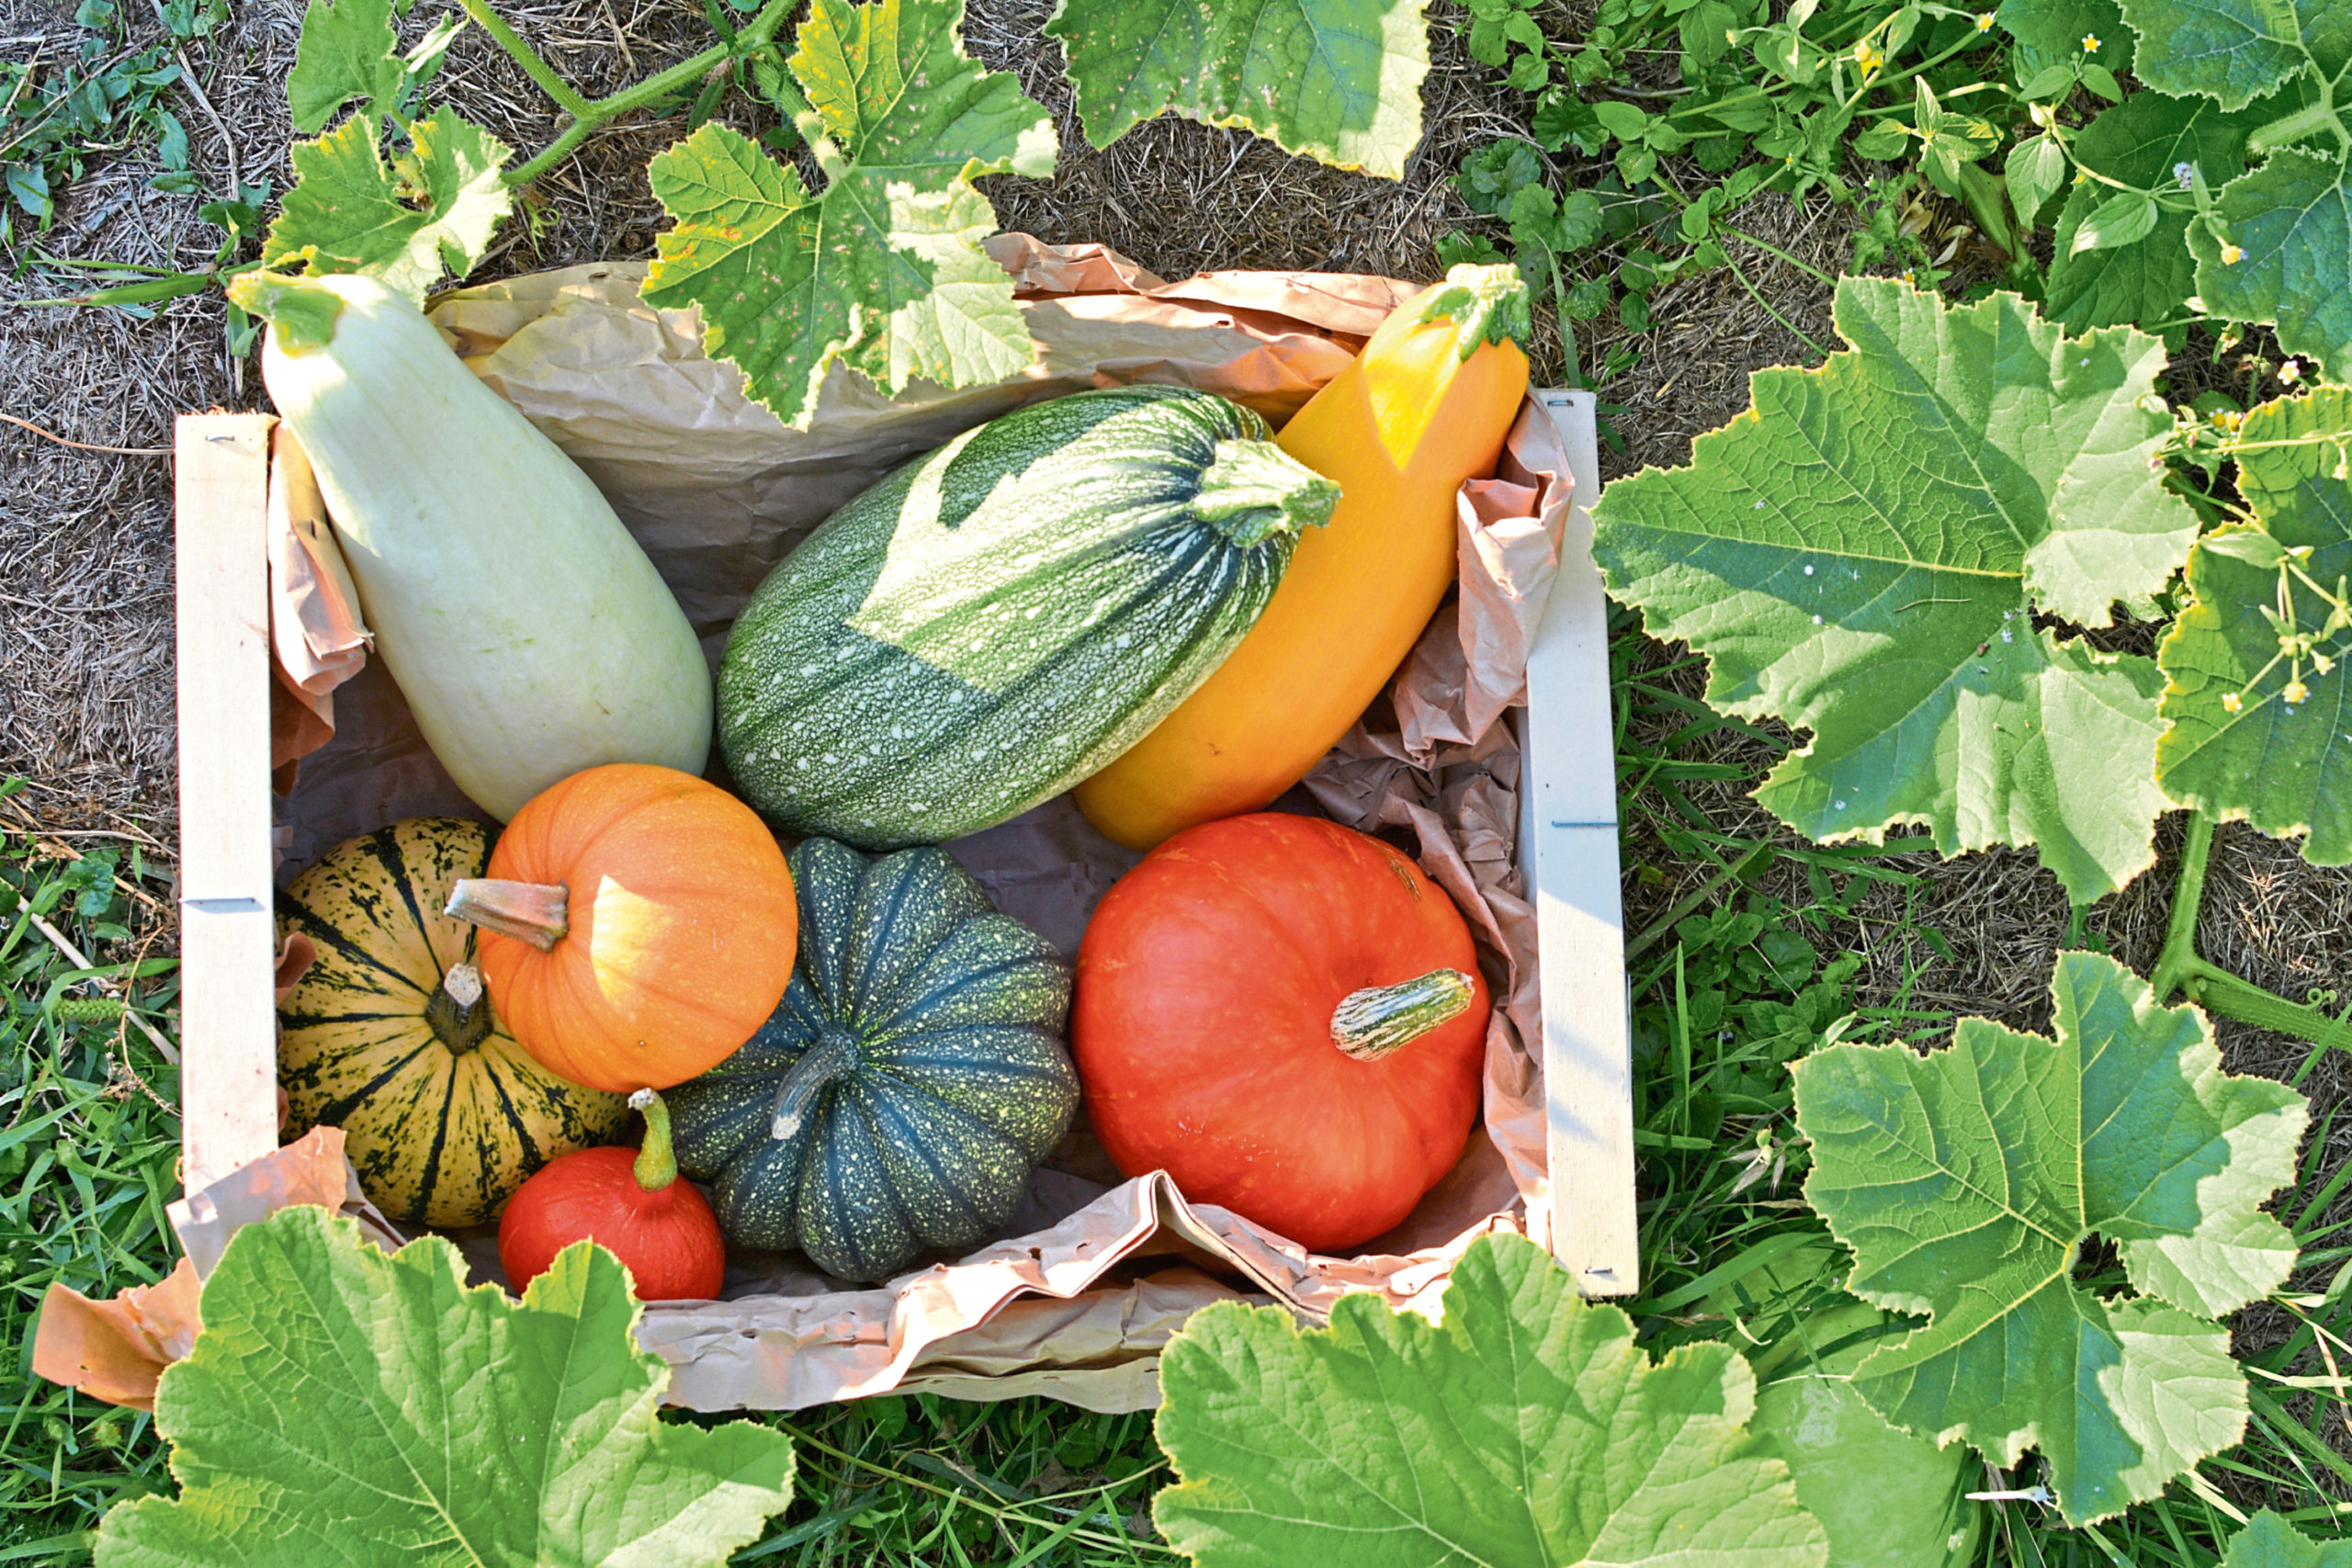 Enjoy a harvest of pumpkins and squashes